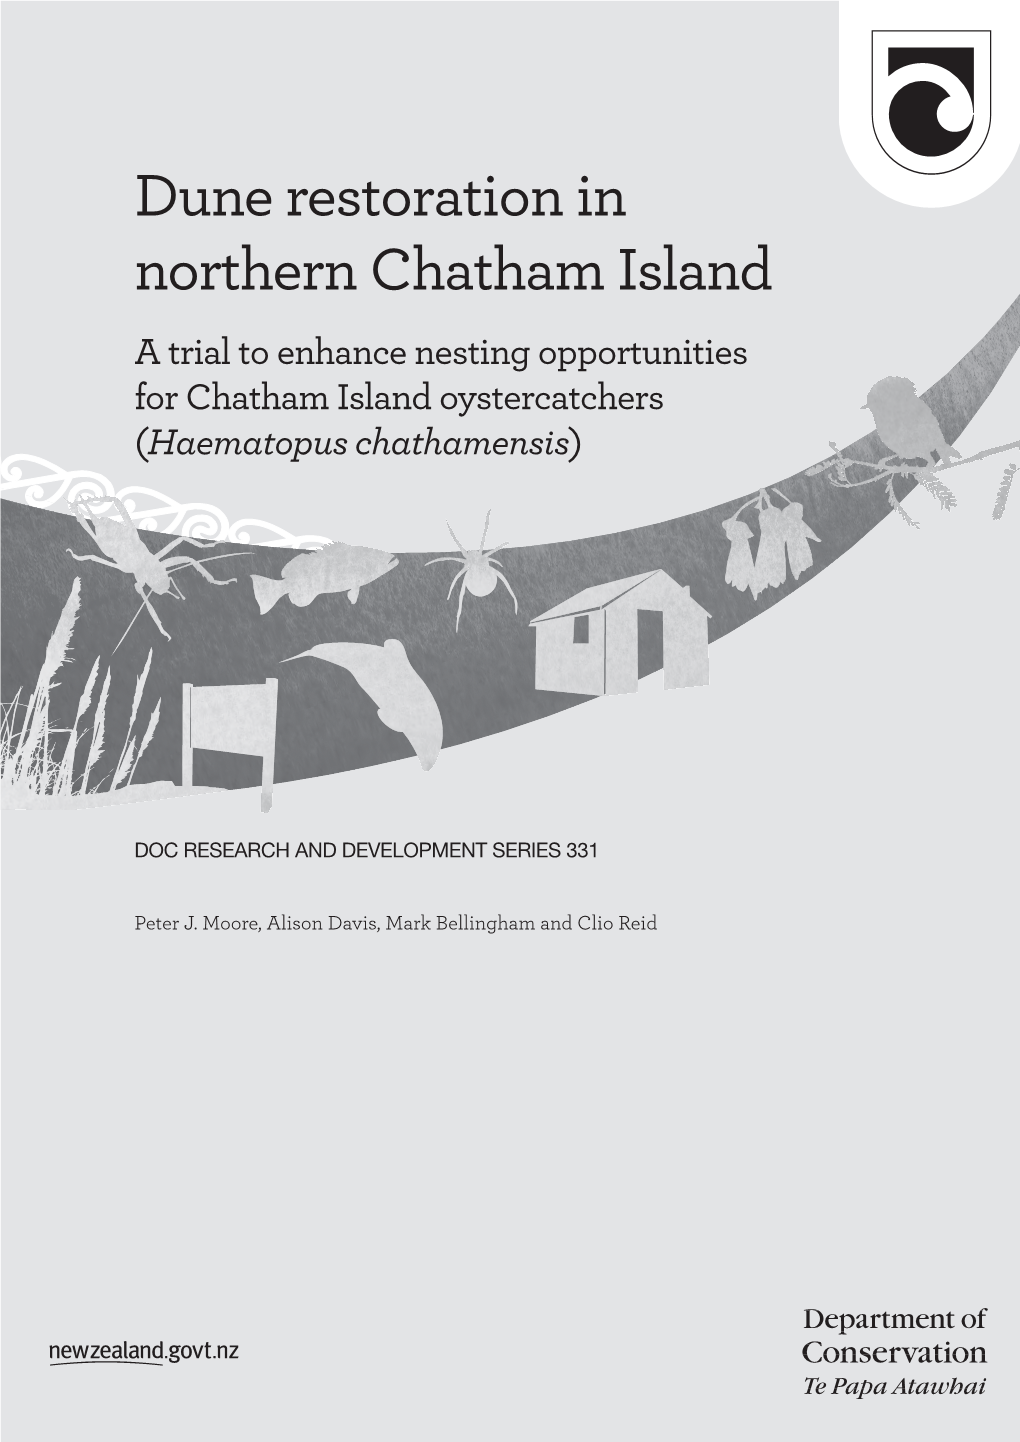 Dune Restoration in Northern Chatham Island a Trial to Enhance Nesting Opportunities for Chatham Island Oystercatchers (Haematopus Chathamensis)